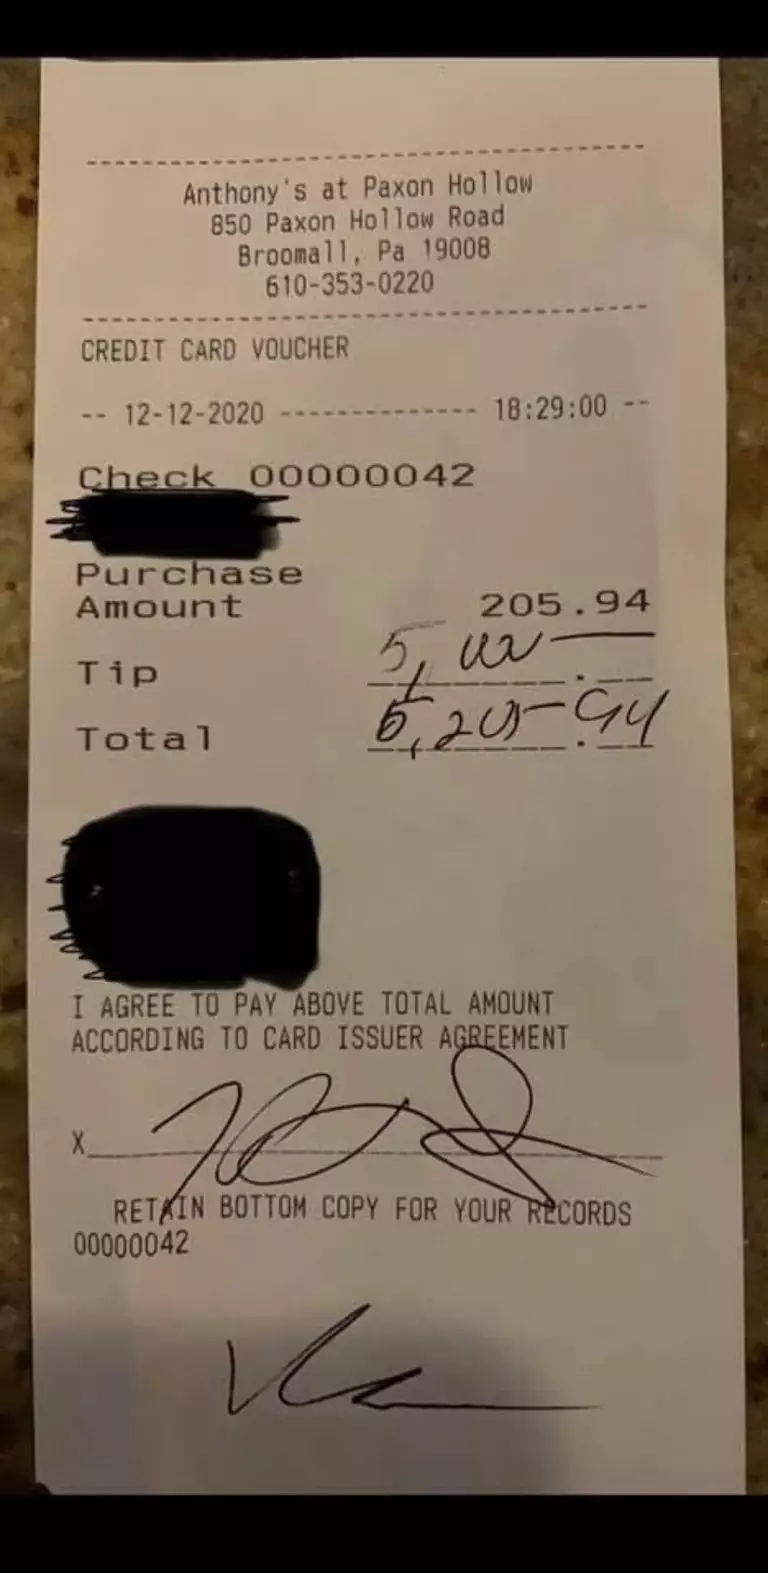 That is one generous tip. Or they're just extremely bad at maths.